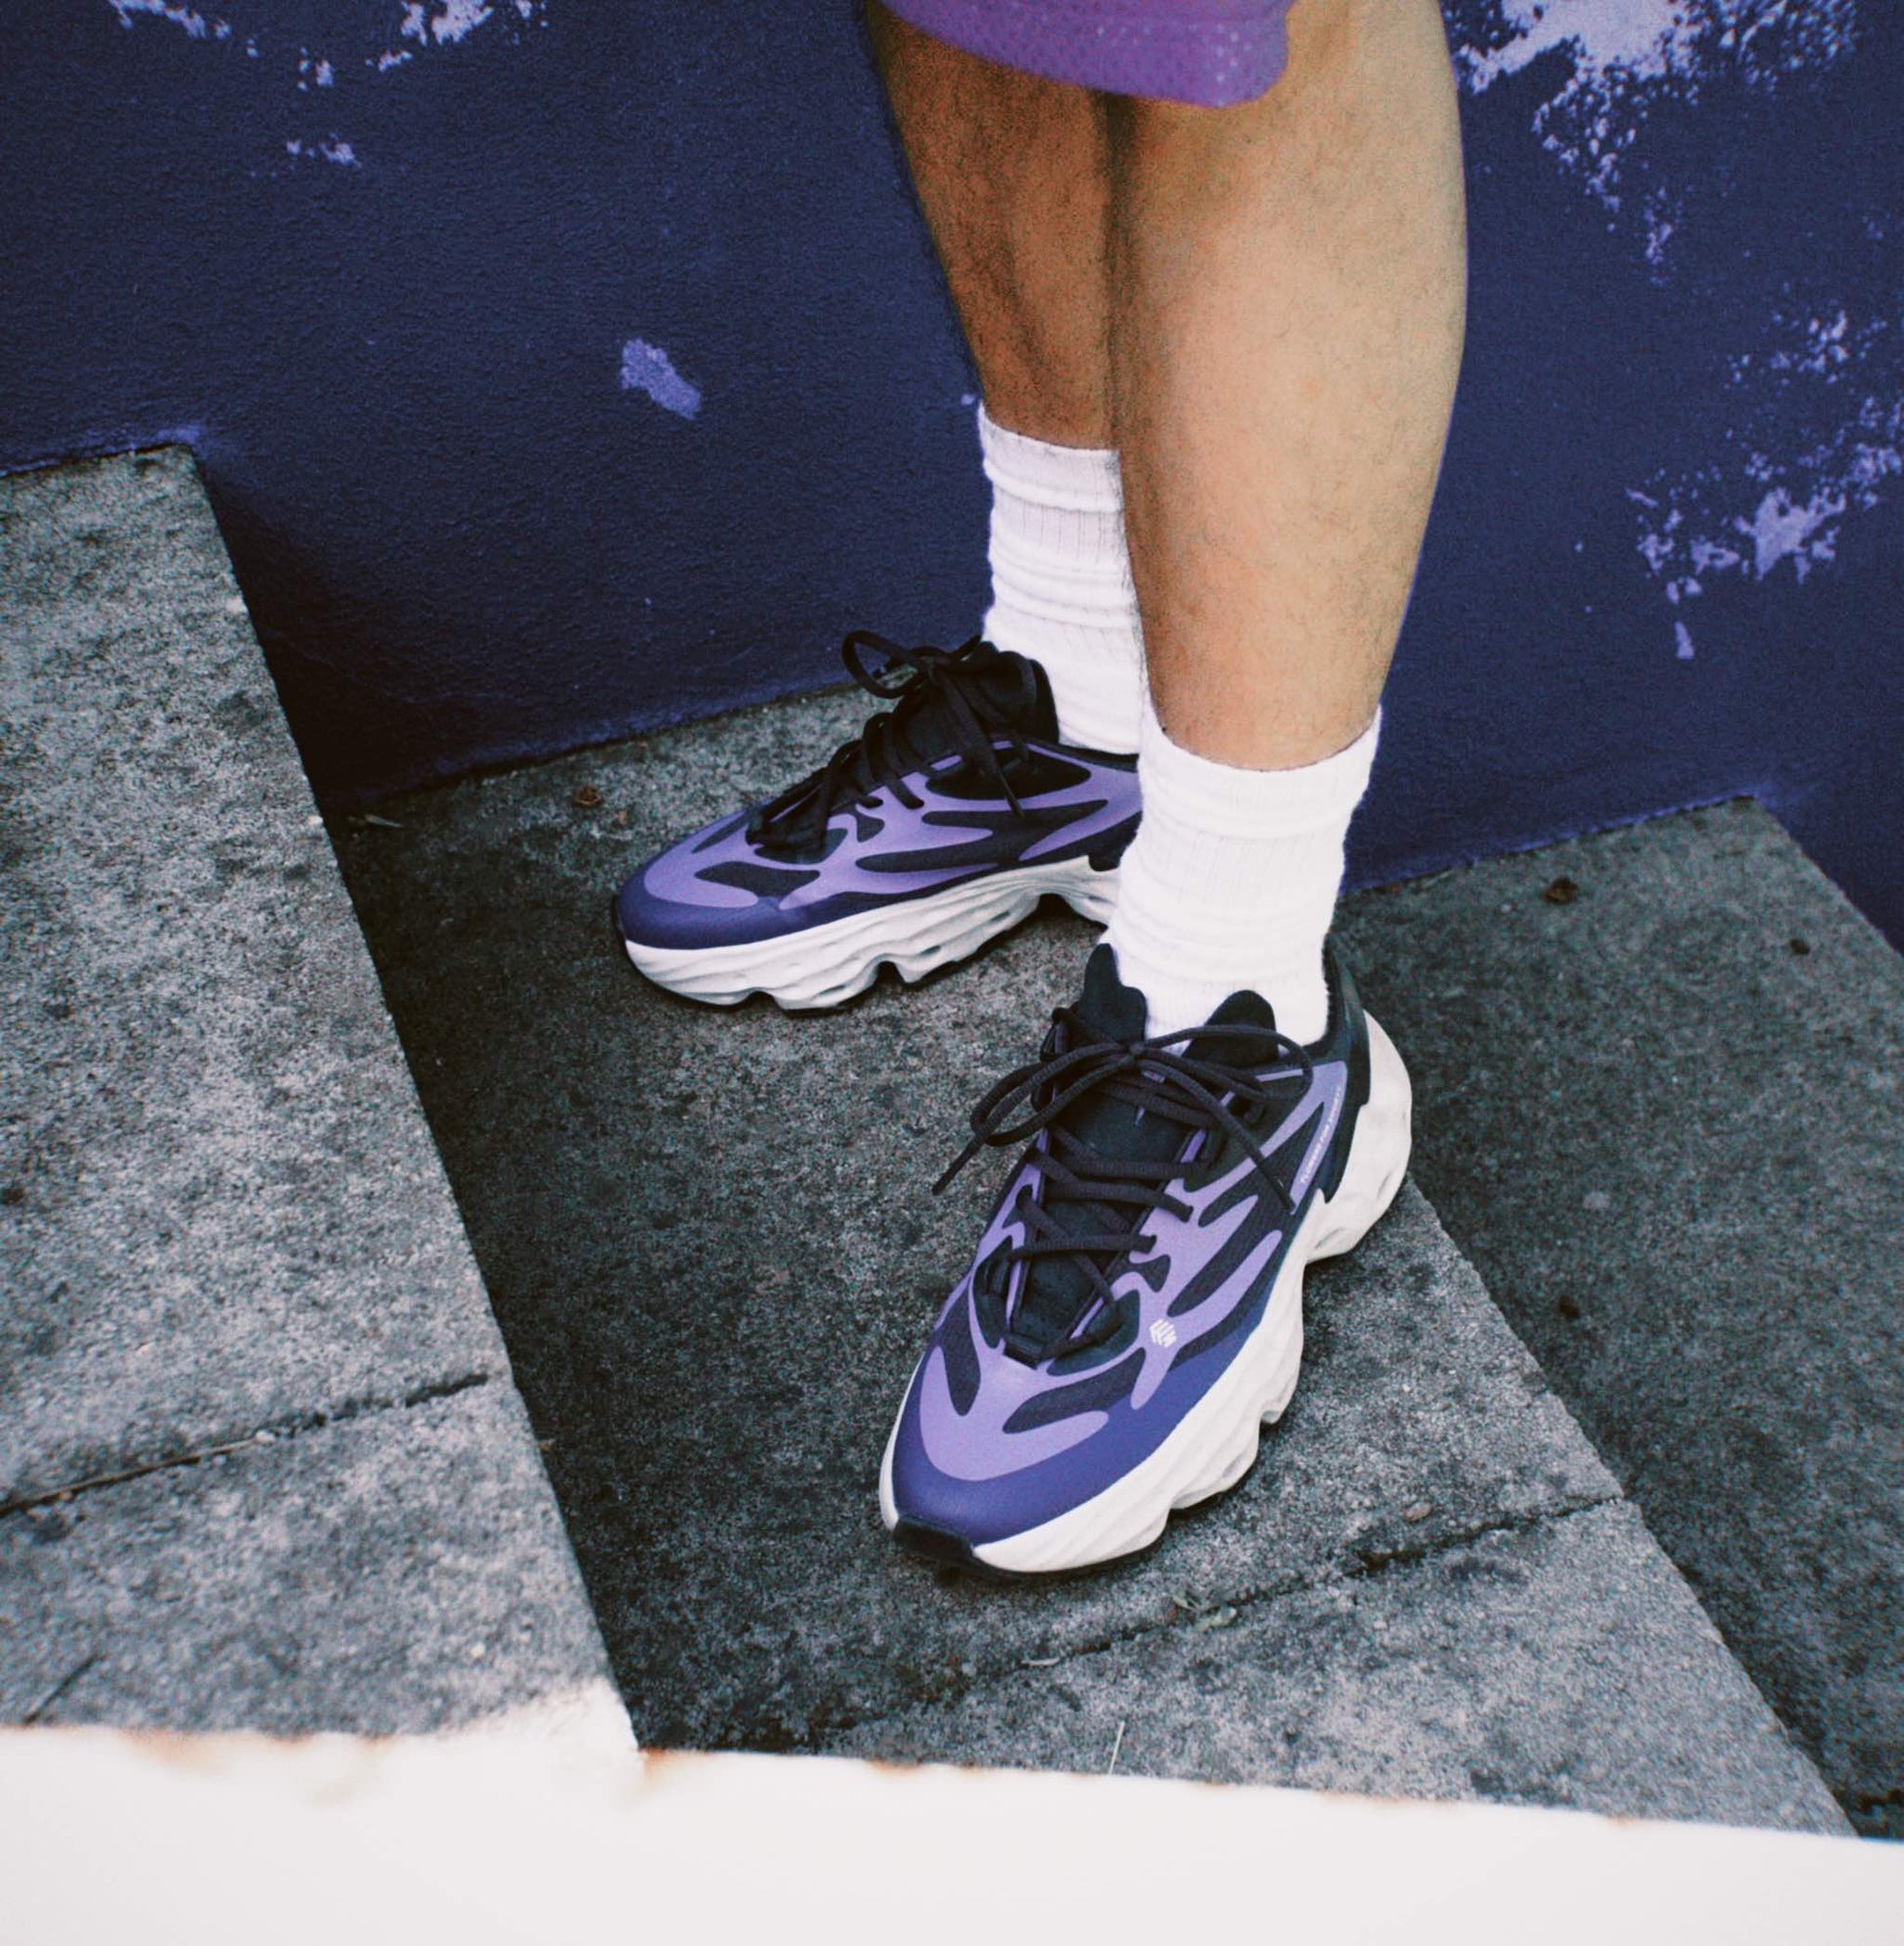 Flowers for Society Sneaker Seed.One Orient purple black sideview worn by model Ben standing